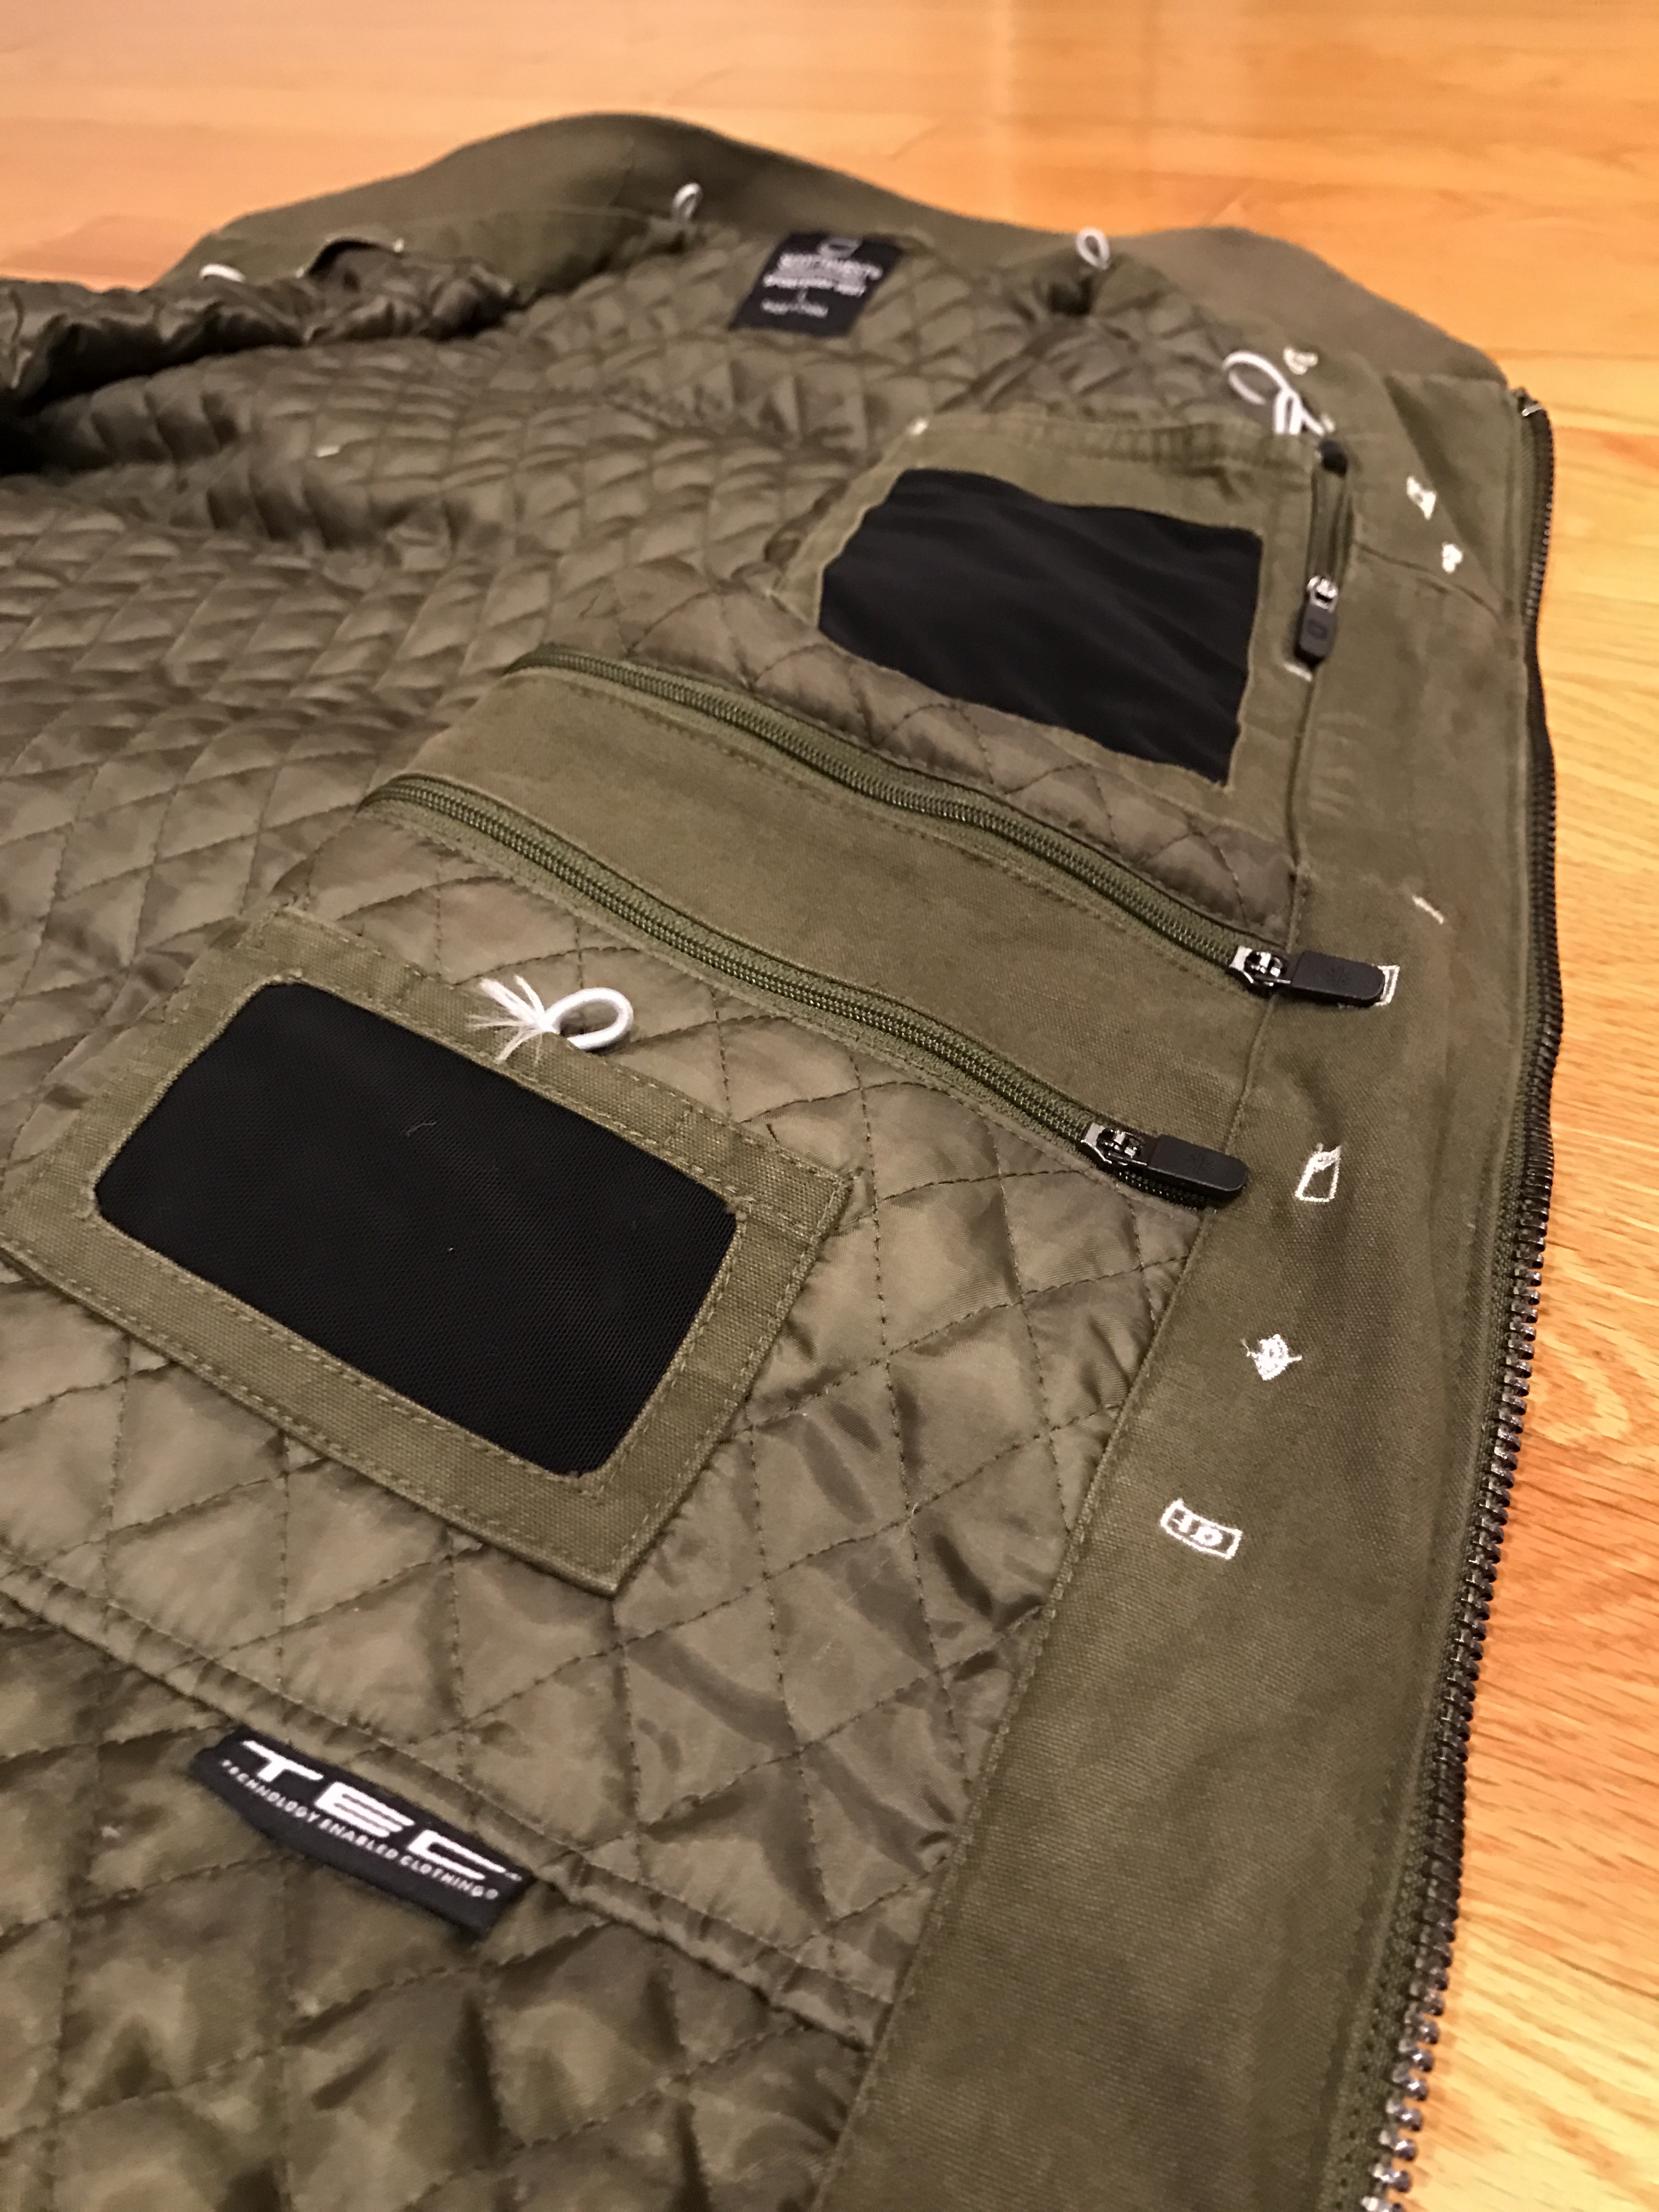 The Sportsman SCOTTeVEST is Ideal for Every Hunter/Outdoorsman | OutdoorHub